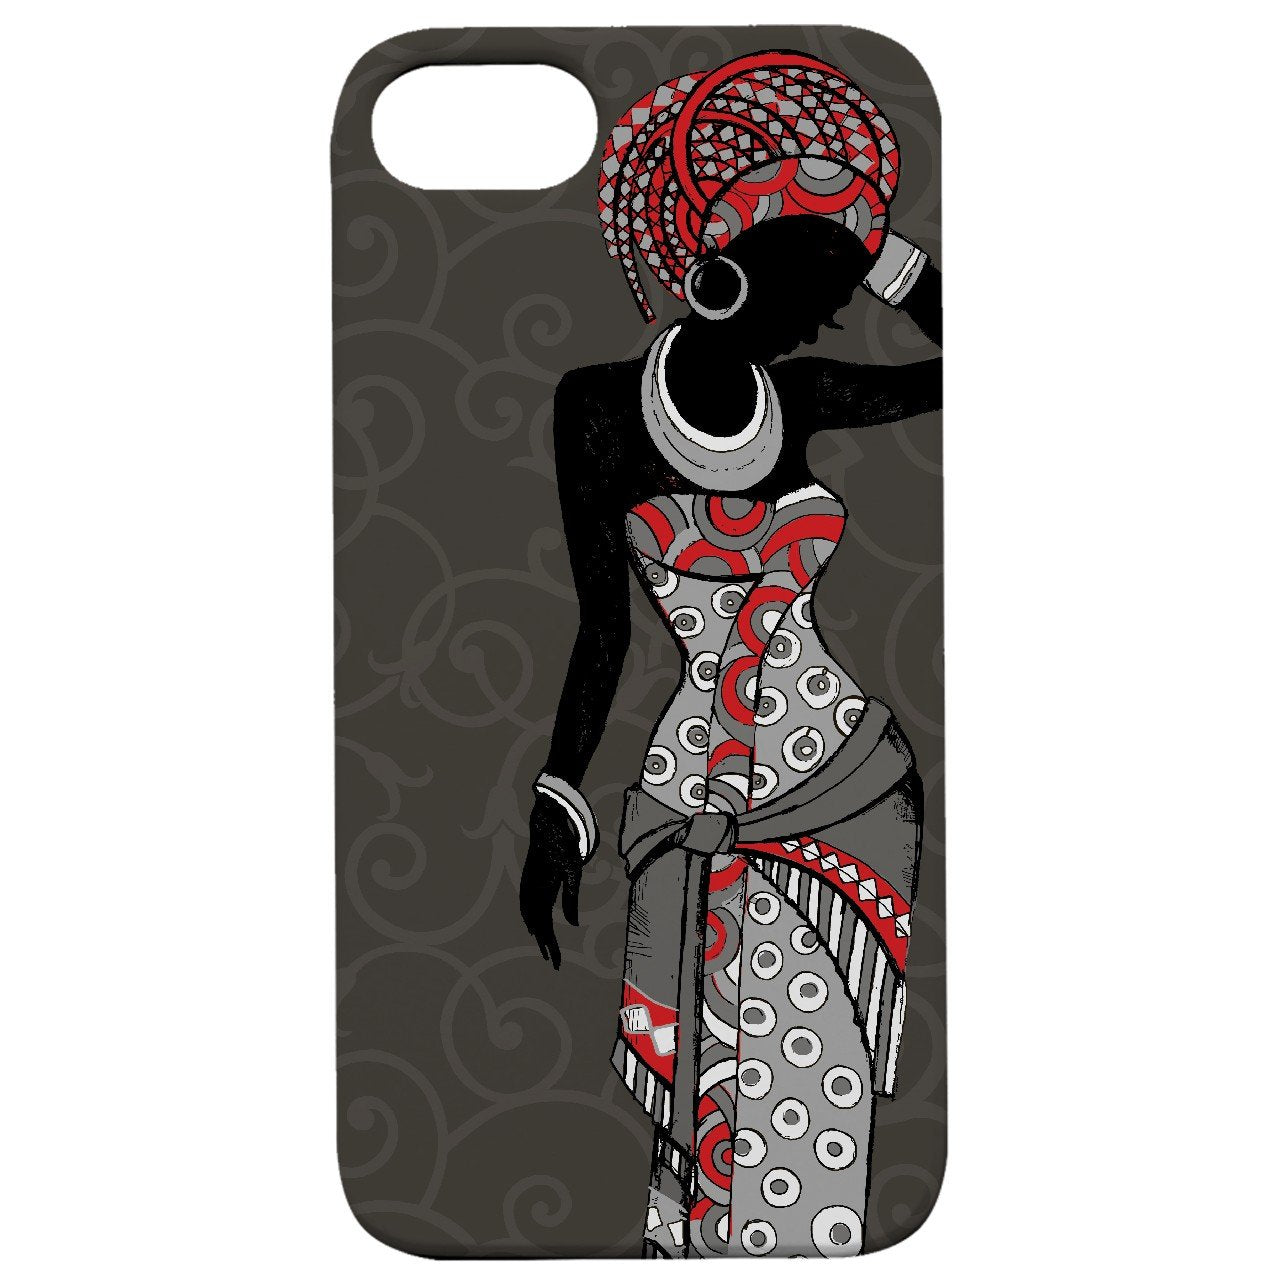 African Woman - UV Color Printed - Wooden Phone Case